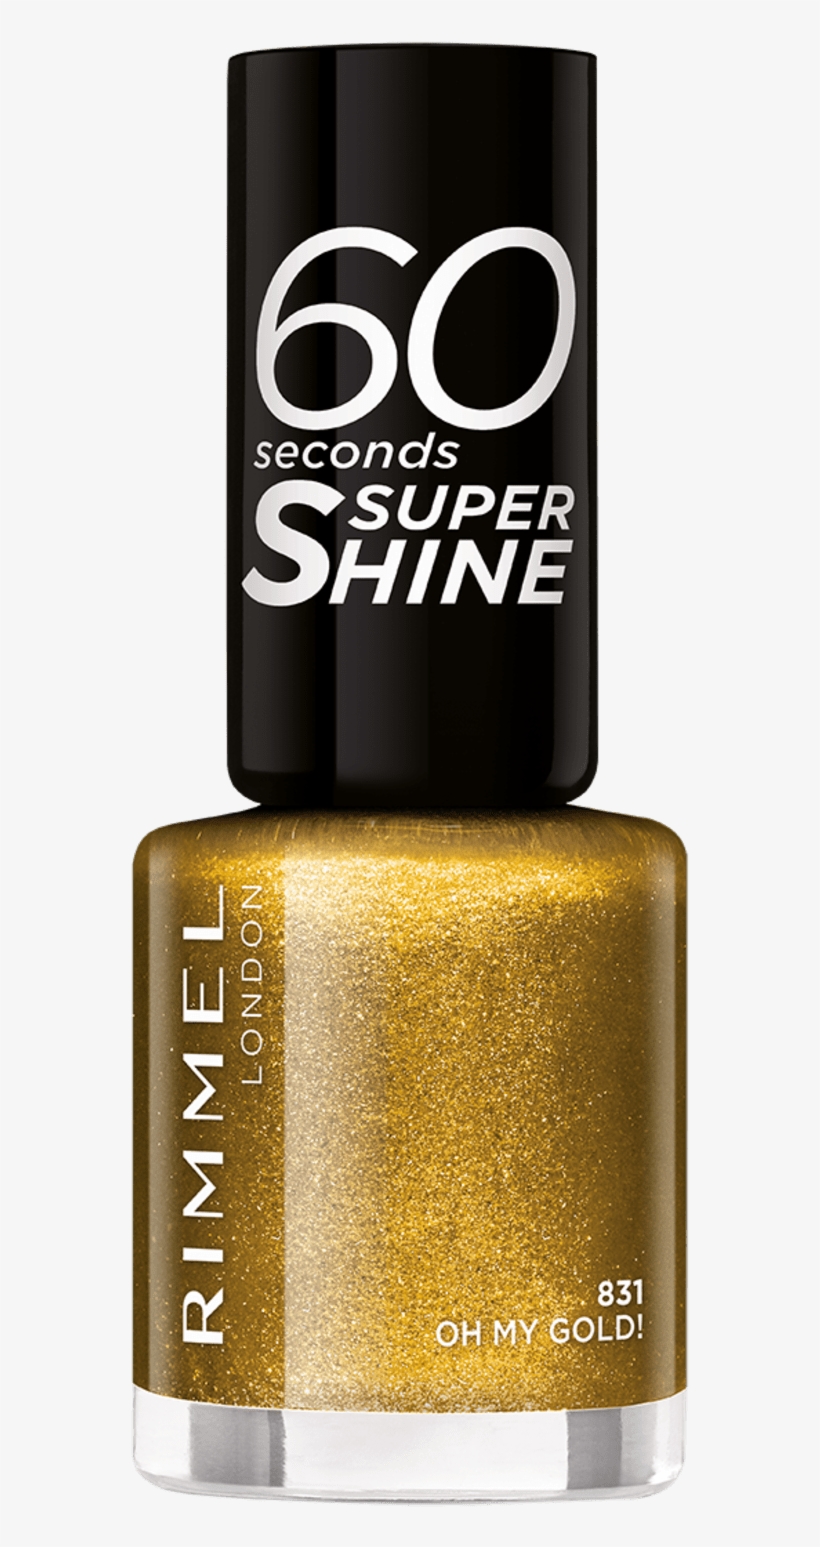 Xmas Party On 60 Seconds Glitter Nails - Rimmel 60 Seconds Nail Polish Gold, transparent png #8932100